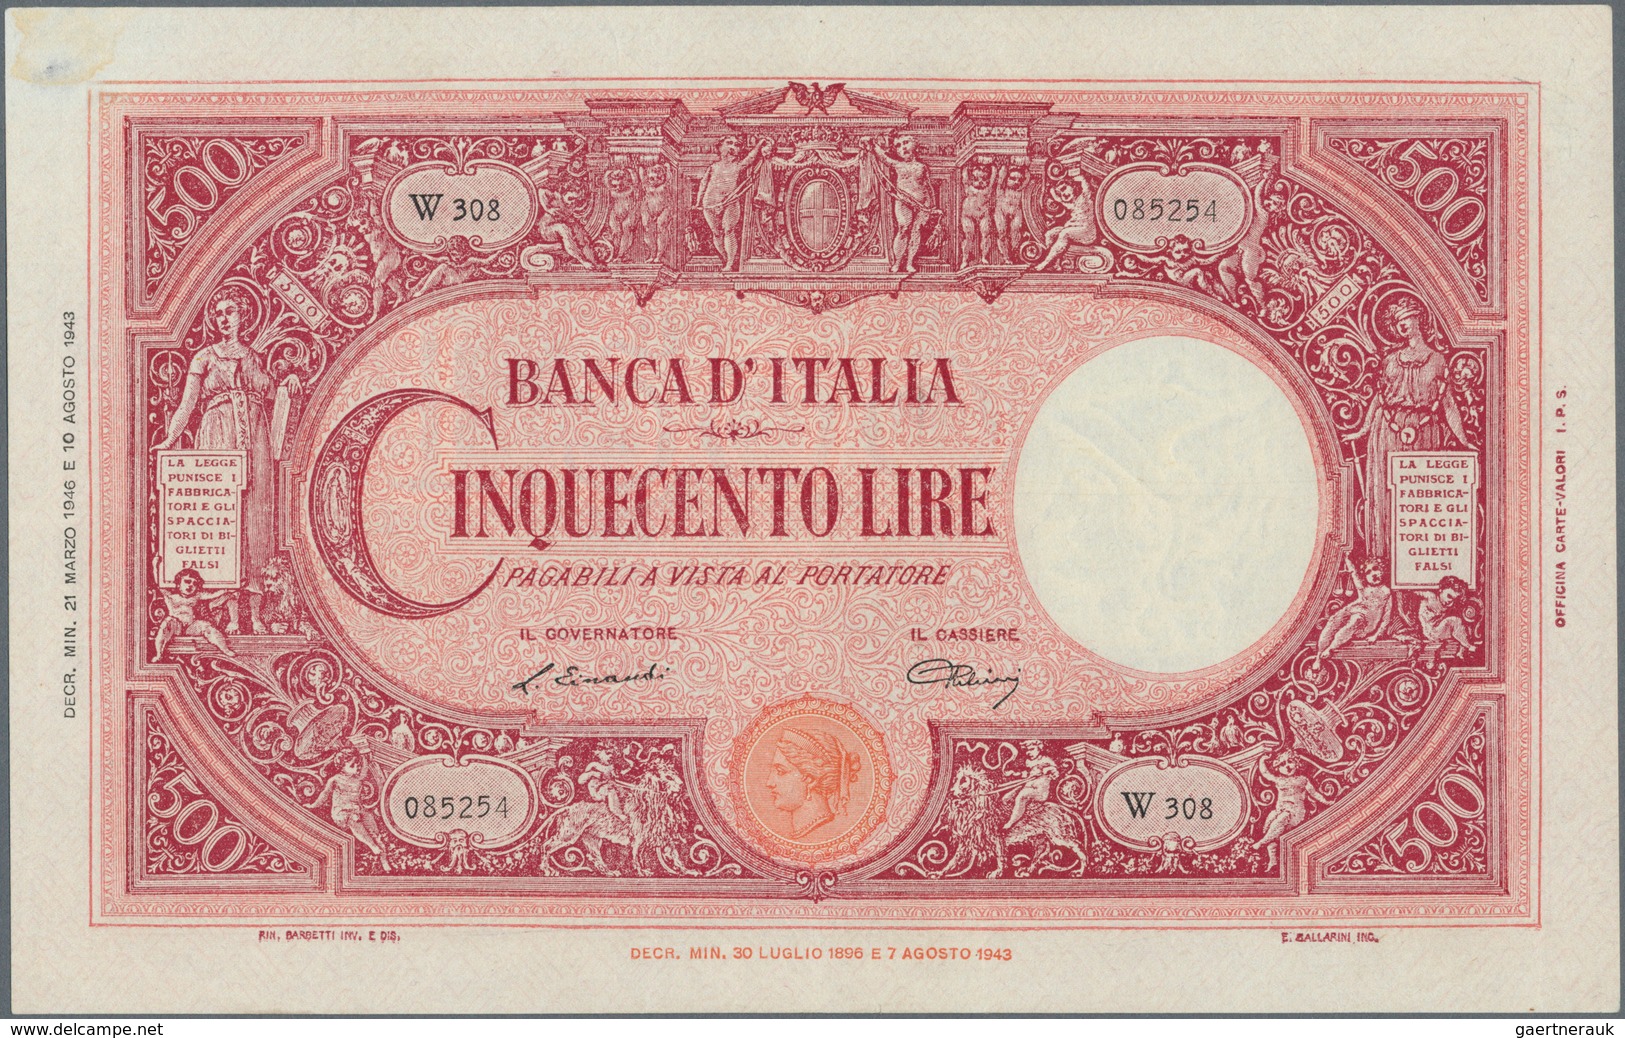 Italy / Italien: set 4 notes 500 Lire 1943/44/46 P. 70, all in similar condition with folds in paper